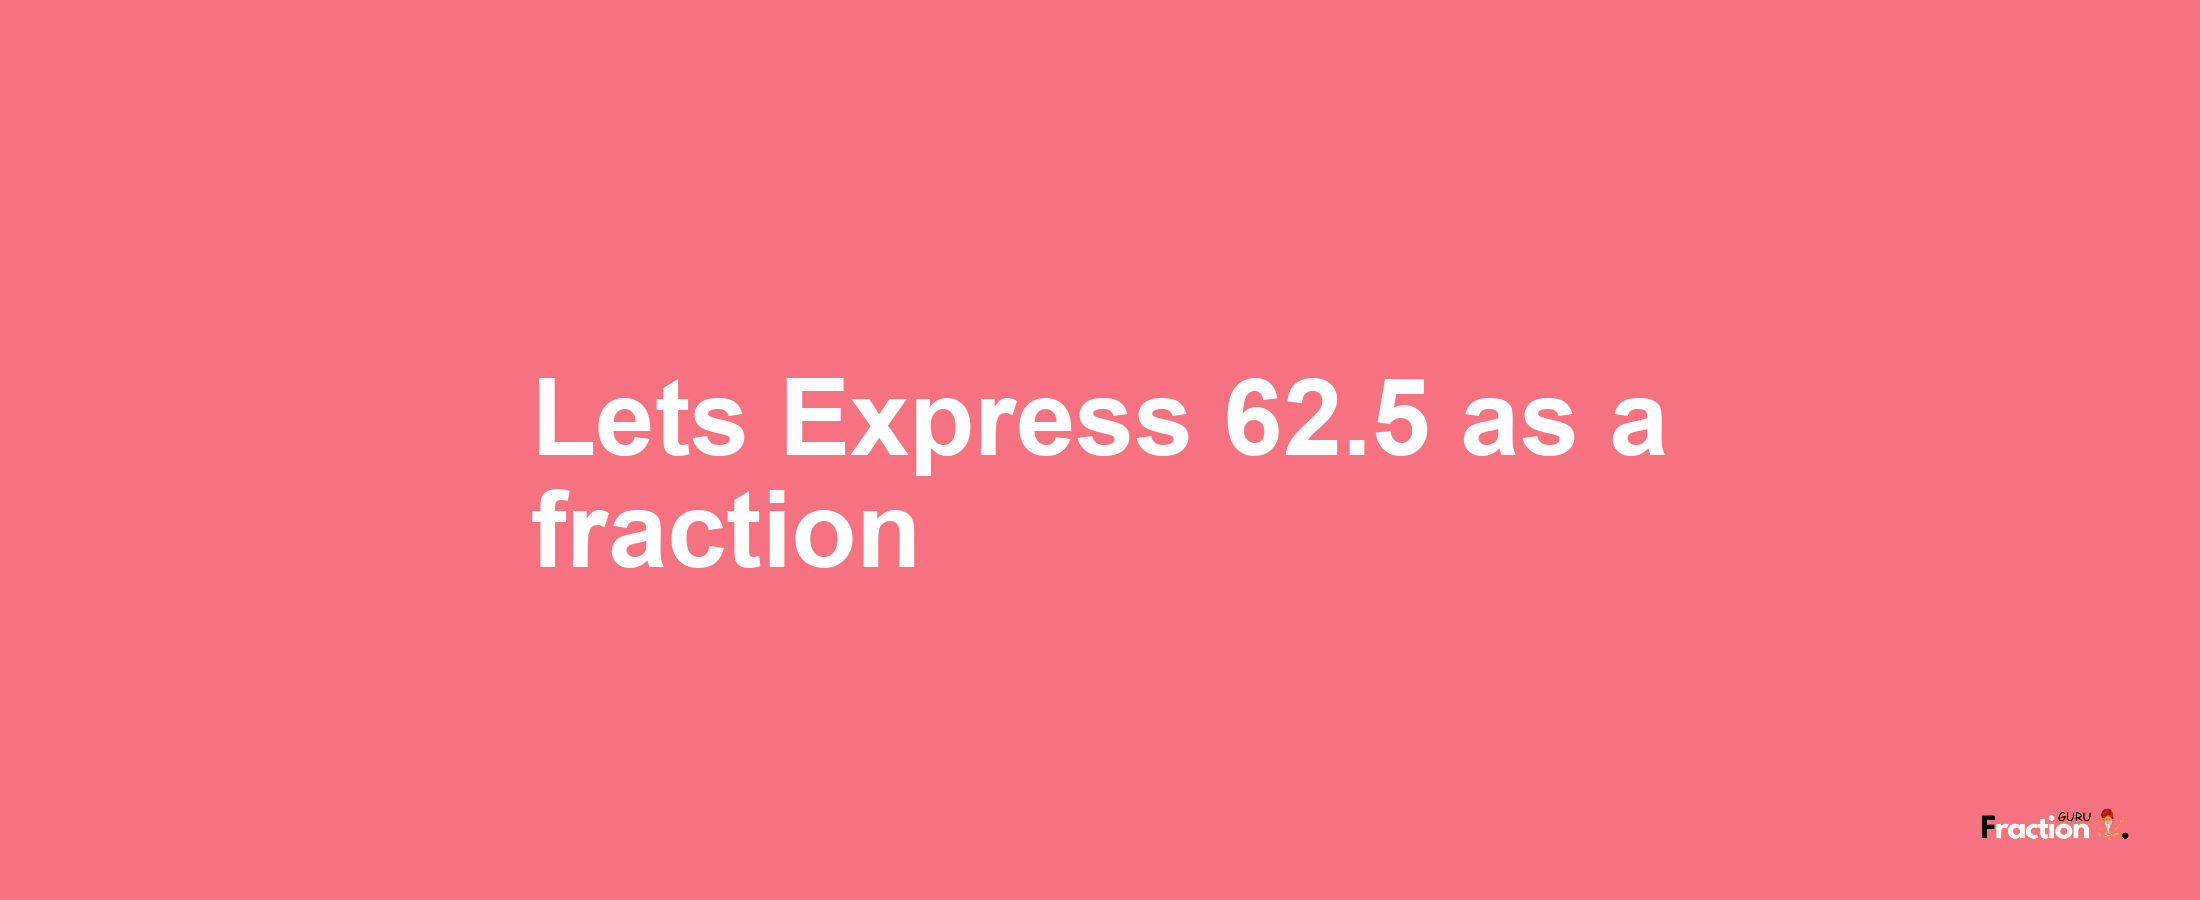 Lets Express 62.5 as afraction